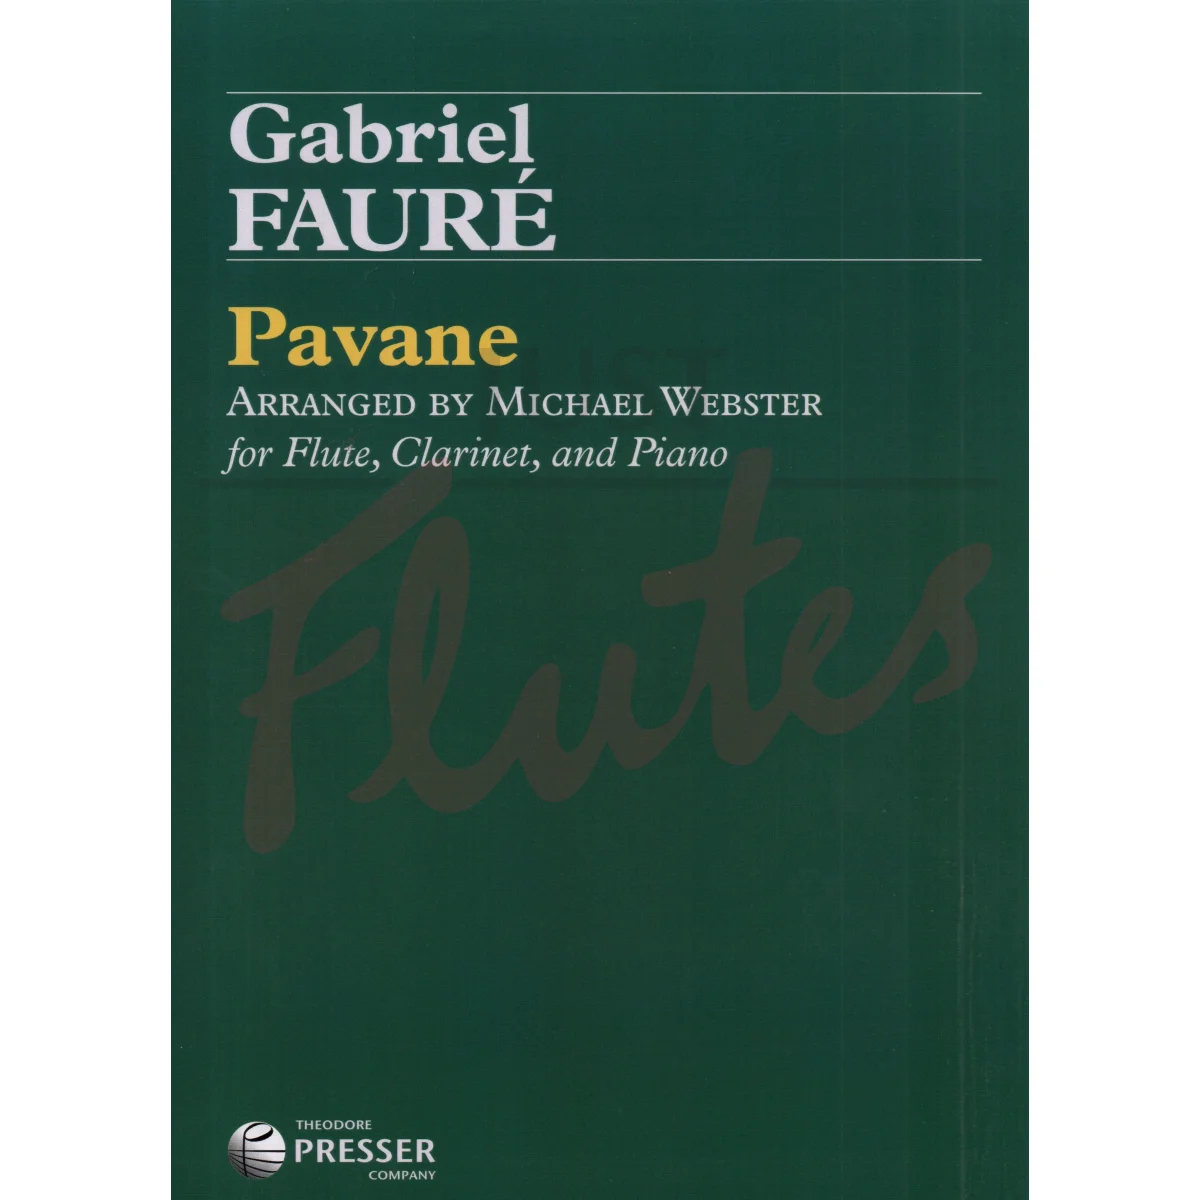 Pavane for Flute, Clarinet and Piano